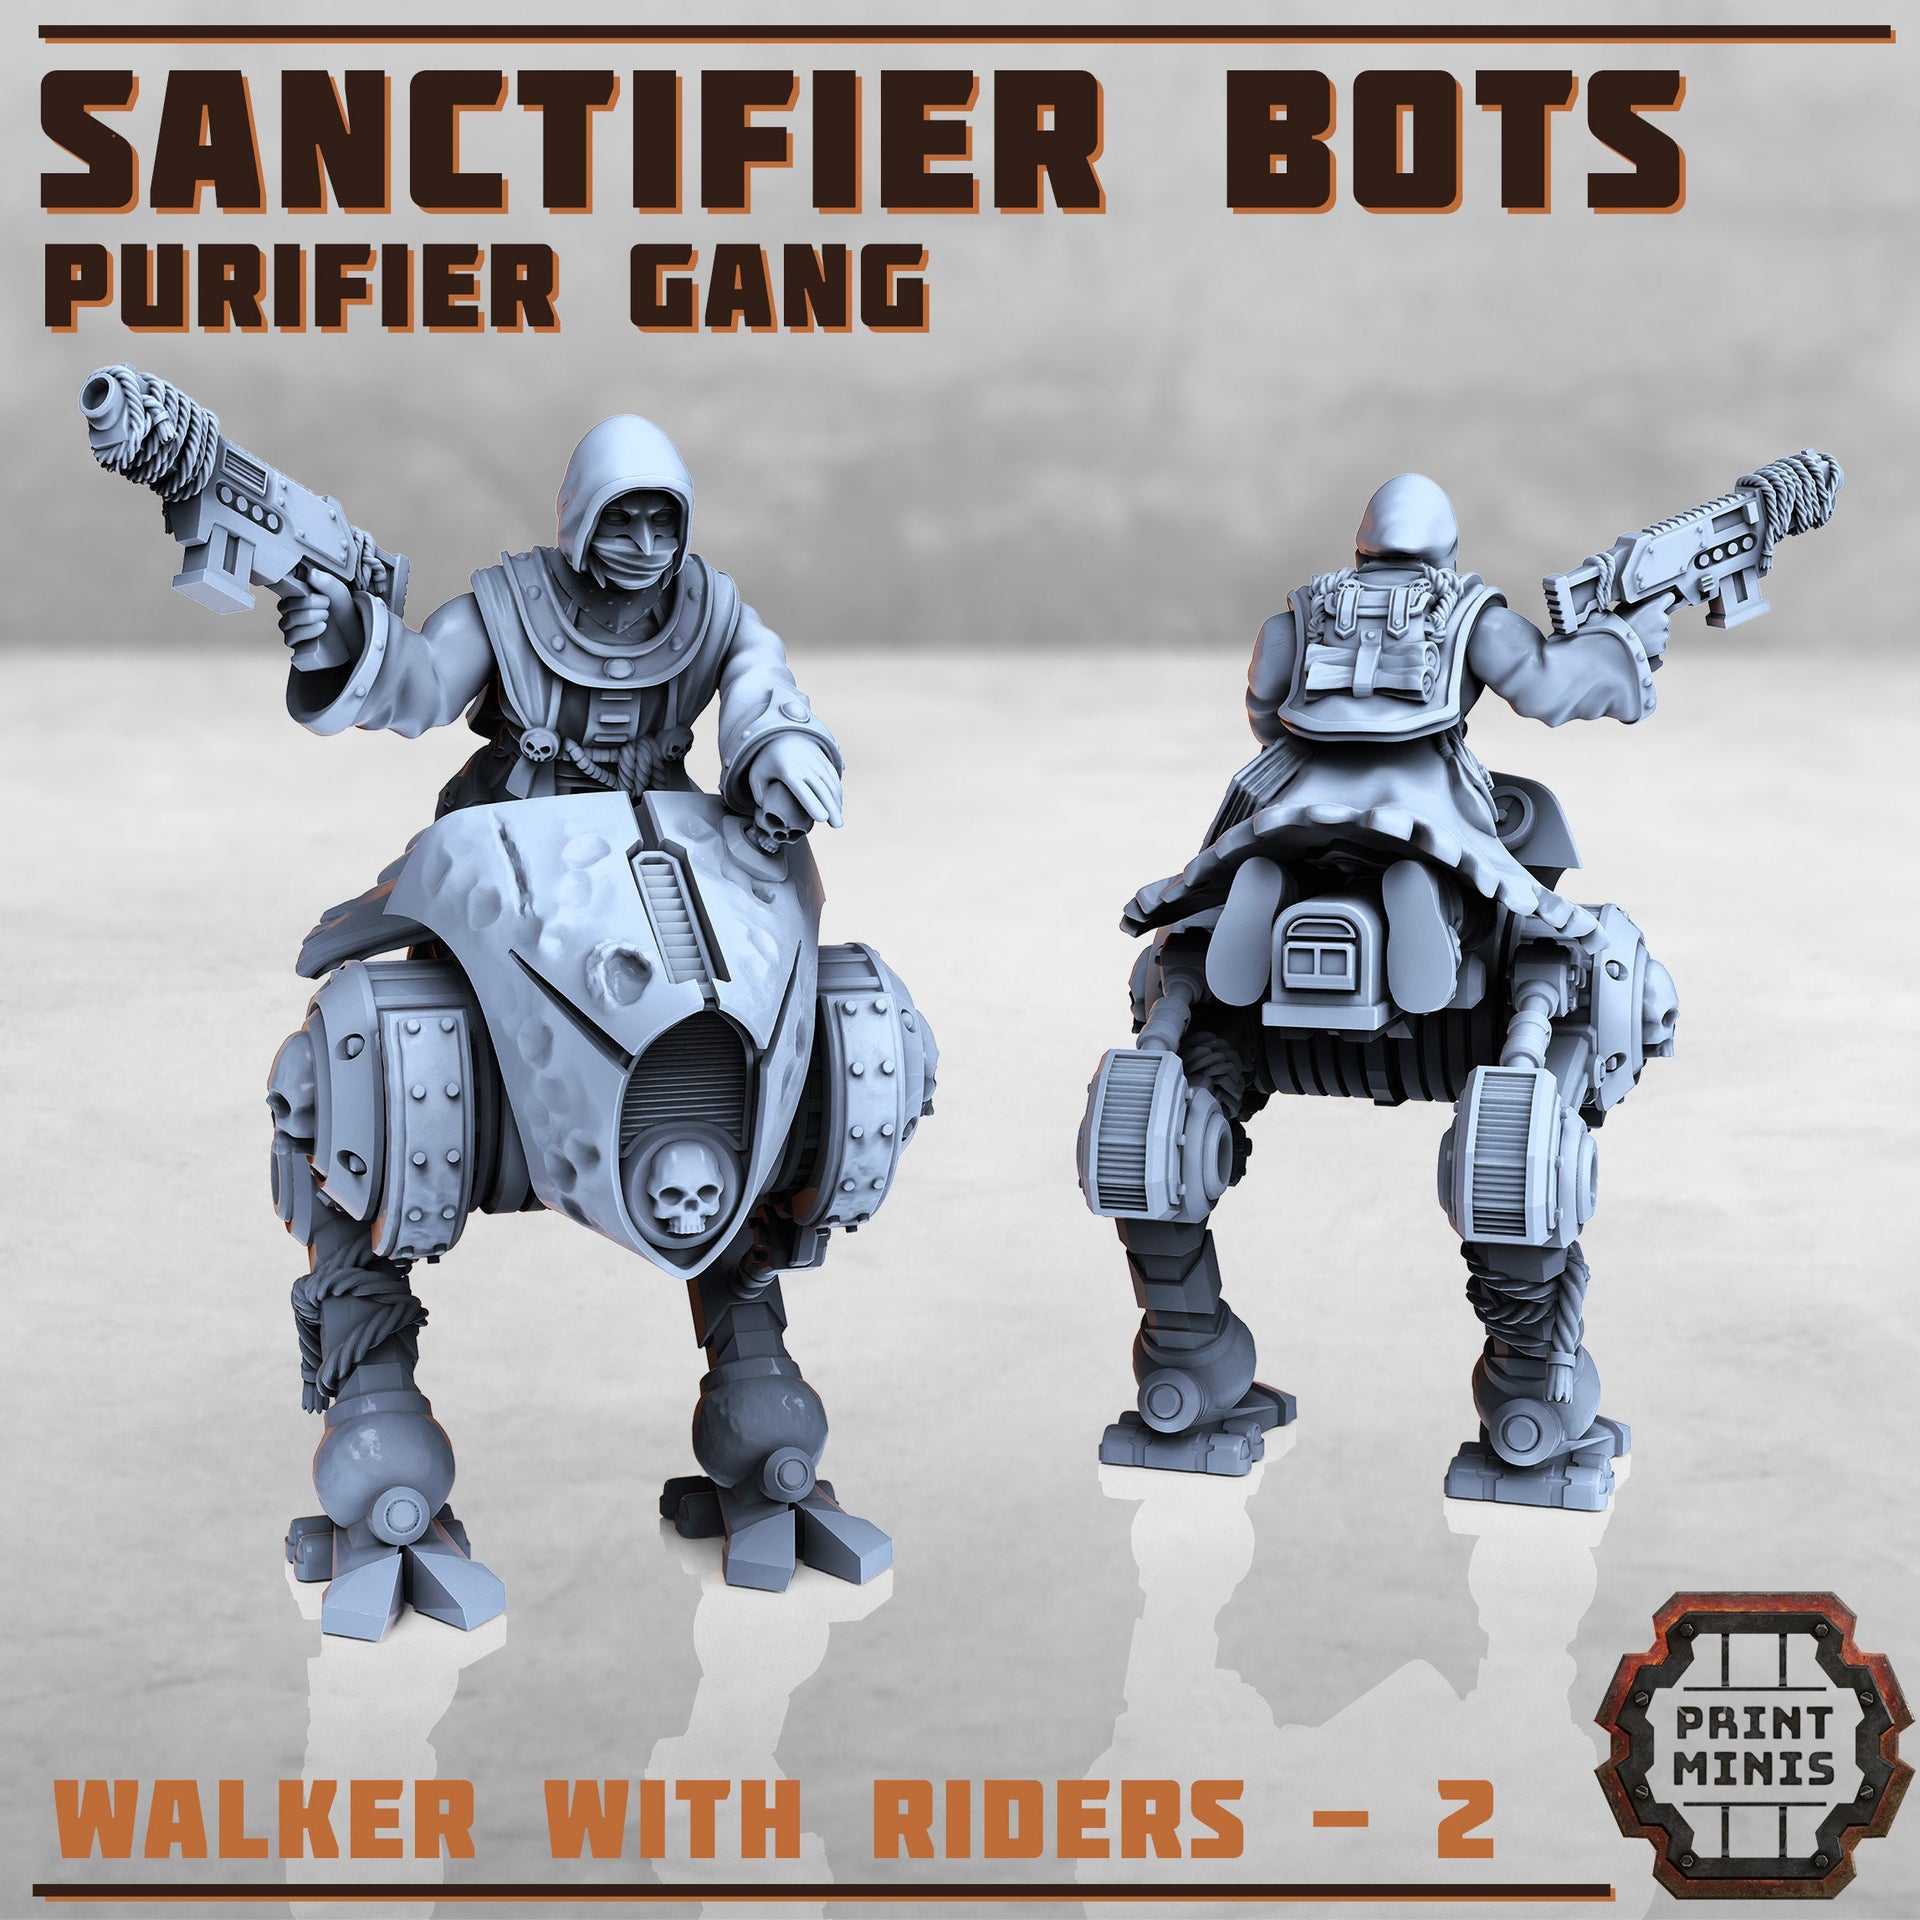 Sanctifier Bot Riders, Scifi Cultists - Print Minis | Sci Fi | Light Infantry | 28mm Heroic | Wasteland | Apocalypse | Imperial | Rogue